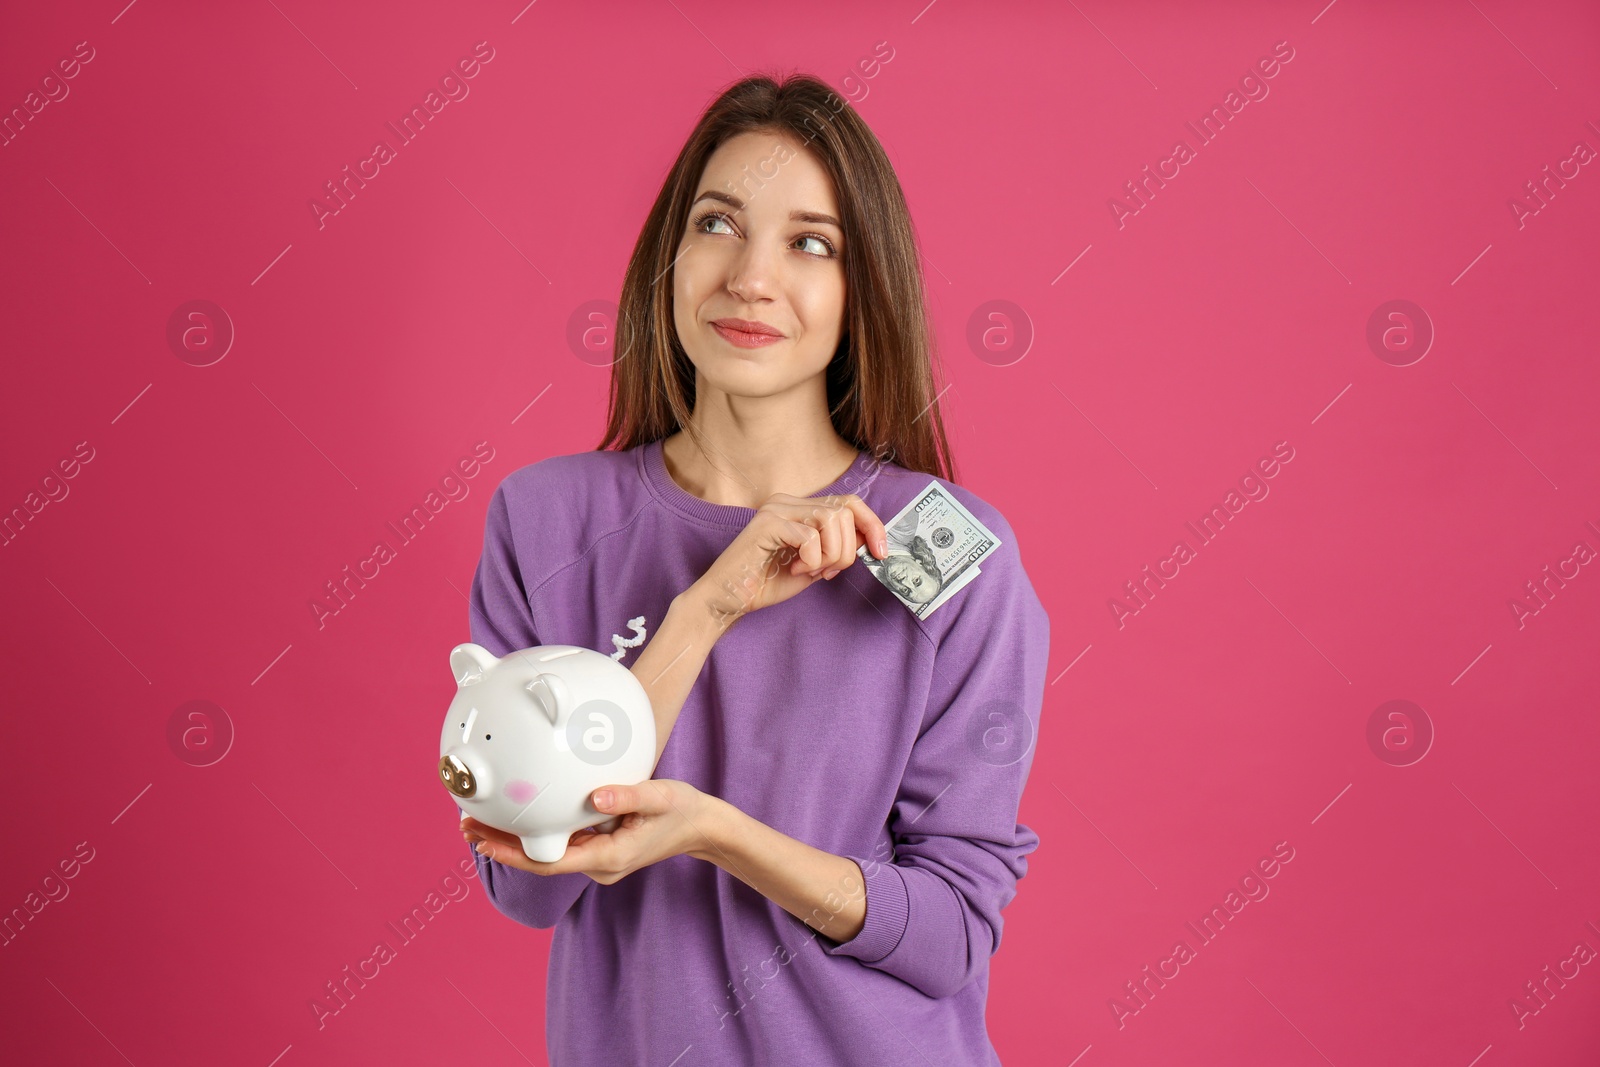 Photo of Happy young woman putting money into piggy bank on pink background